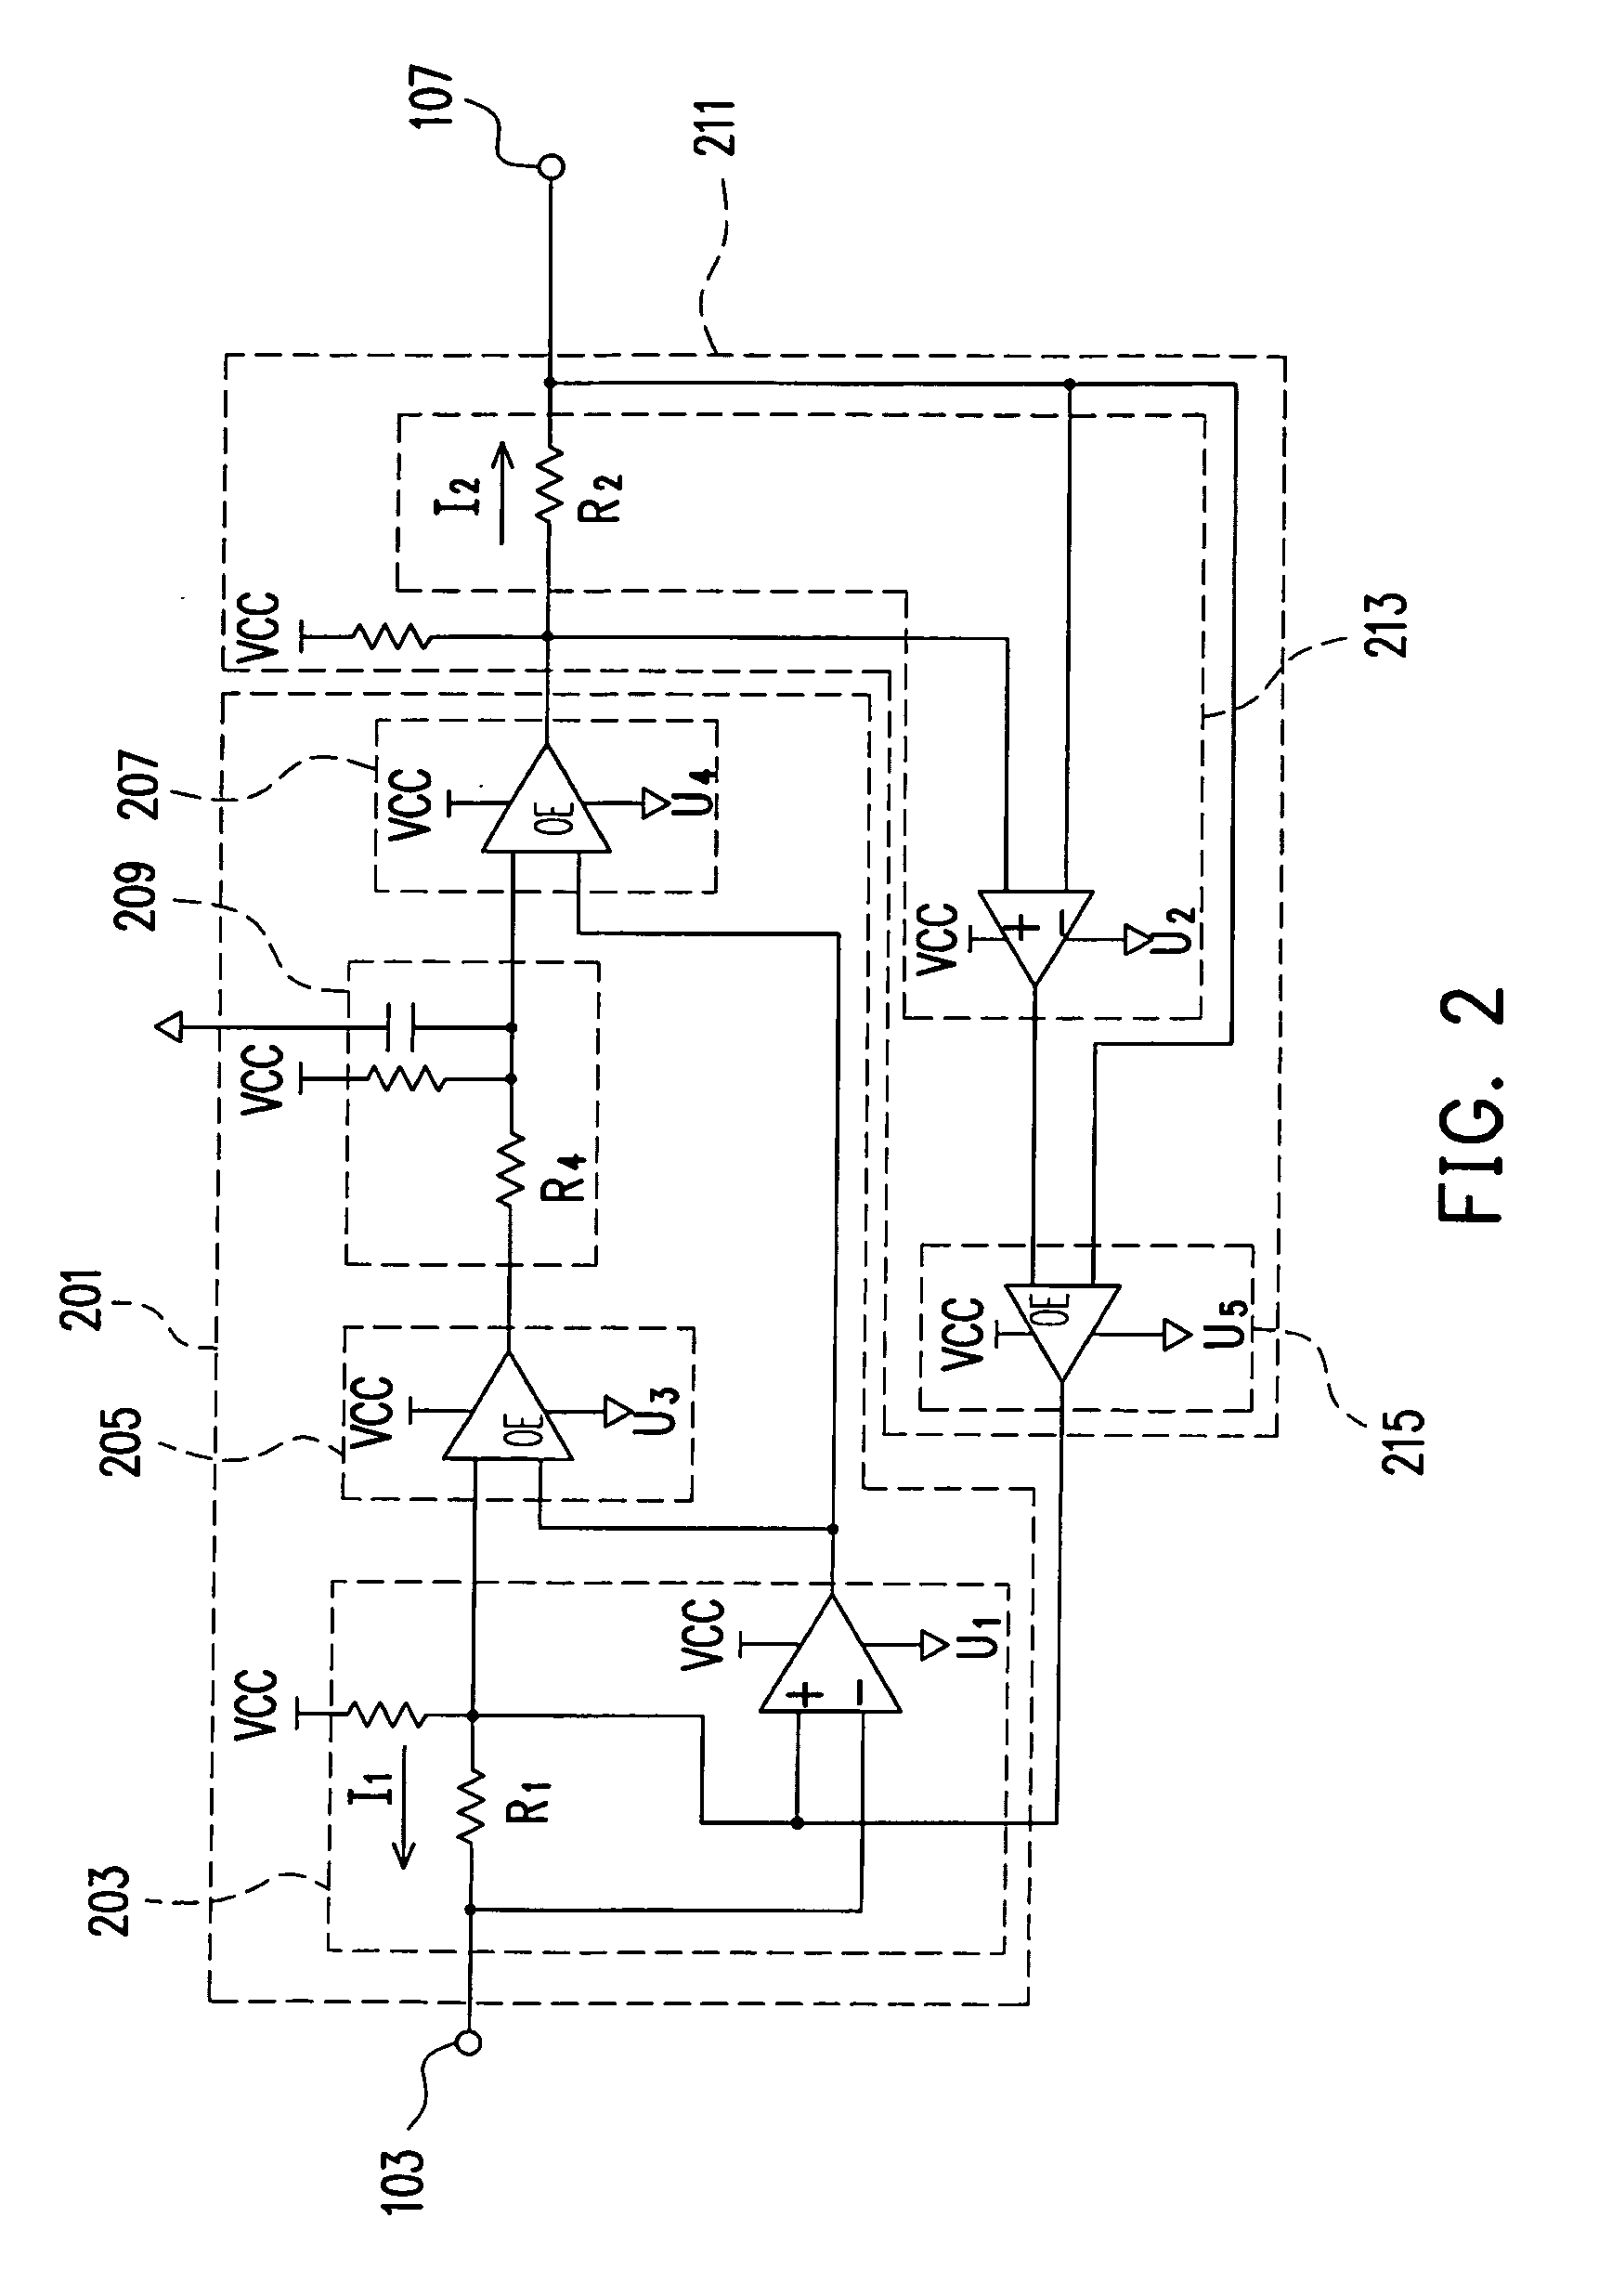 Structure compatible with i2c bus and system management bus and timing buffering apparatus thereof